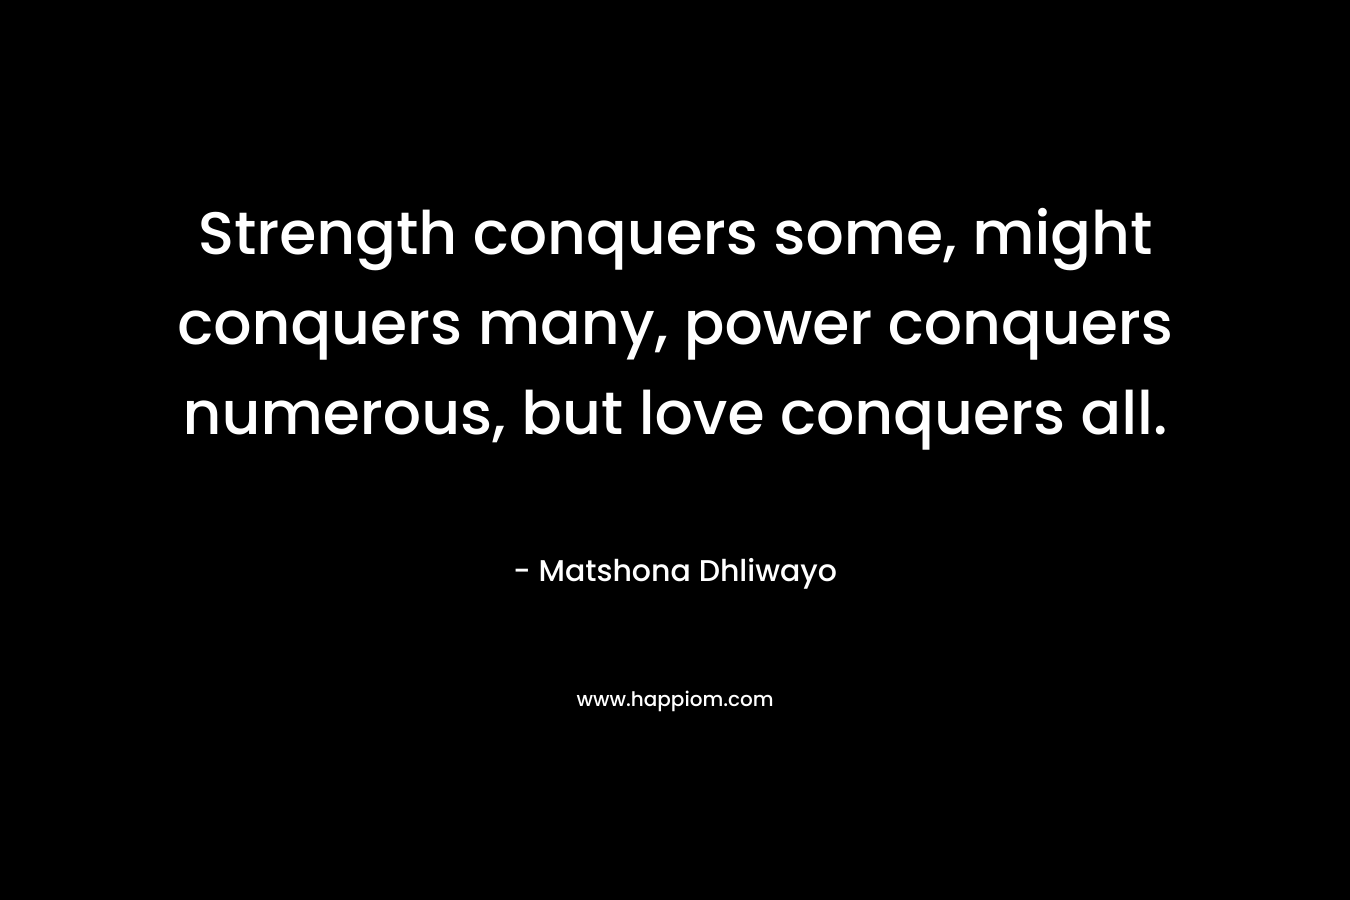 Strength conquers some, might conquers many, power conquers numerous, but love conquers all.